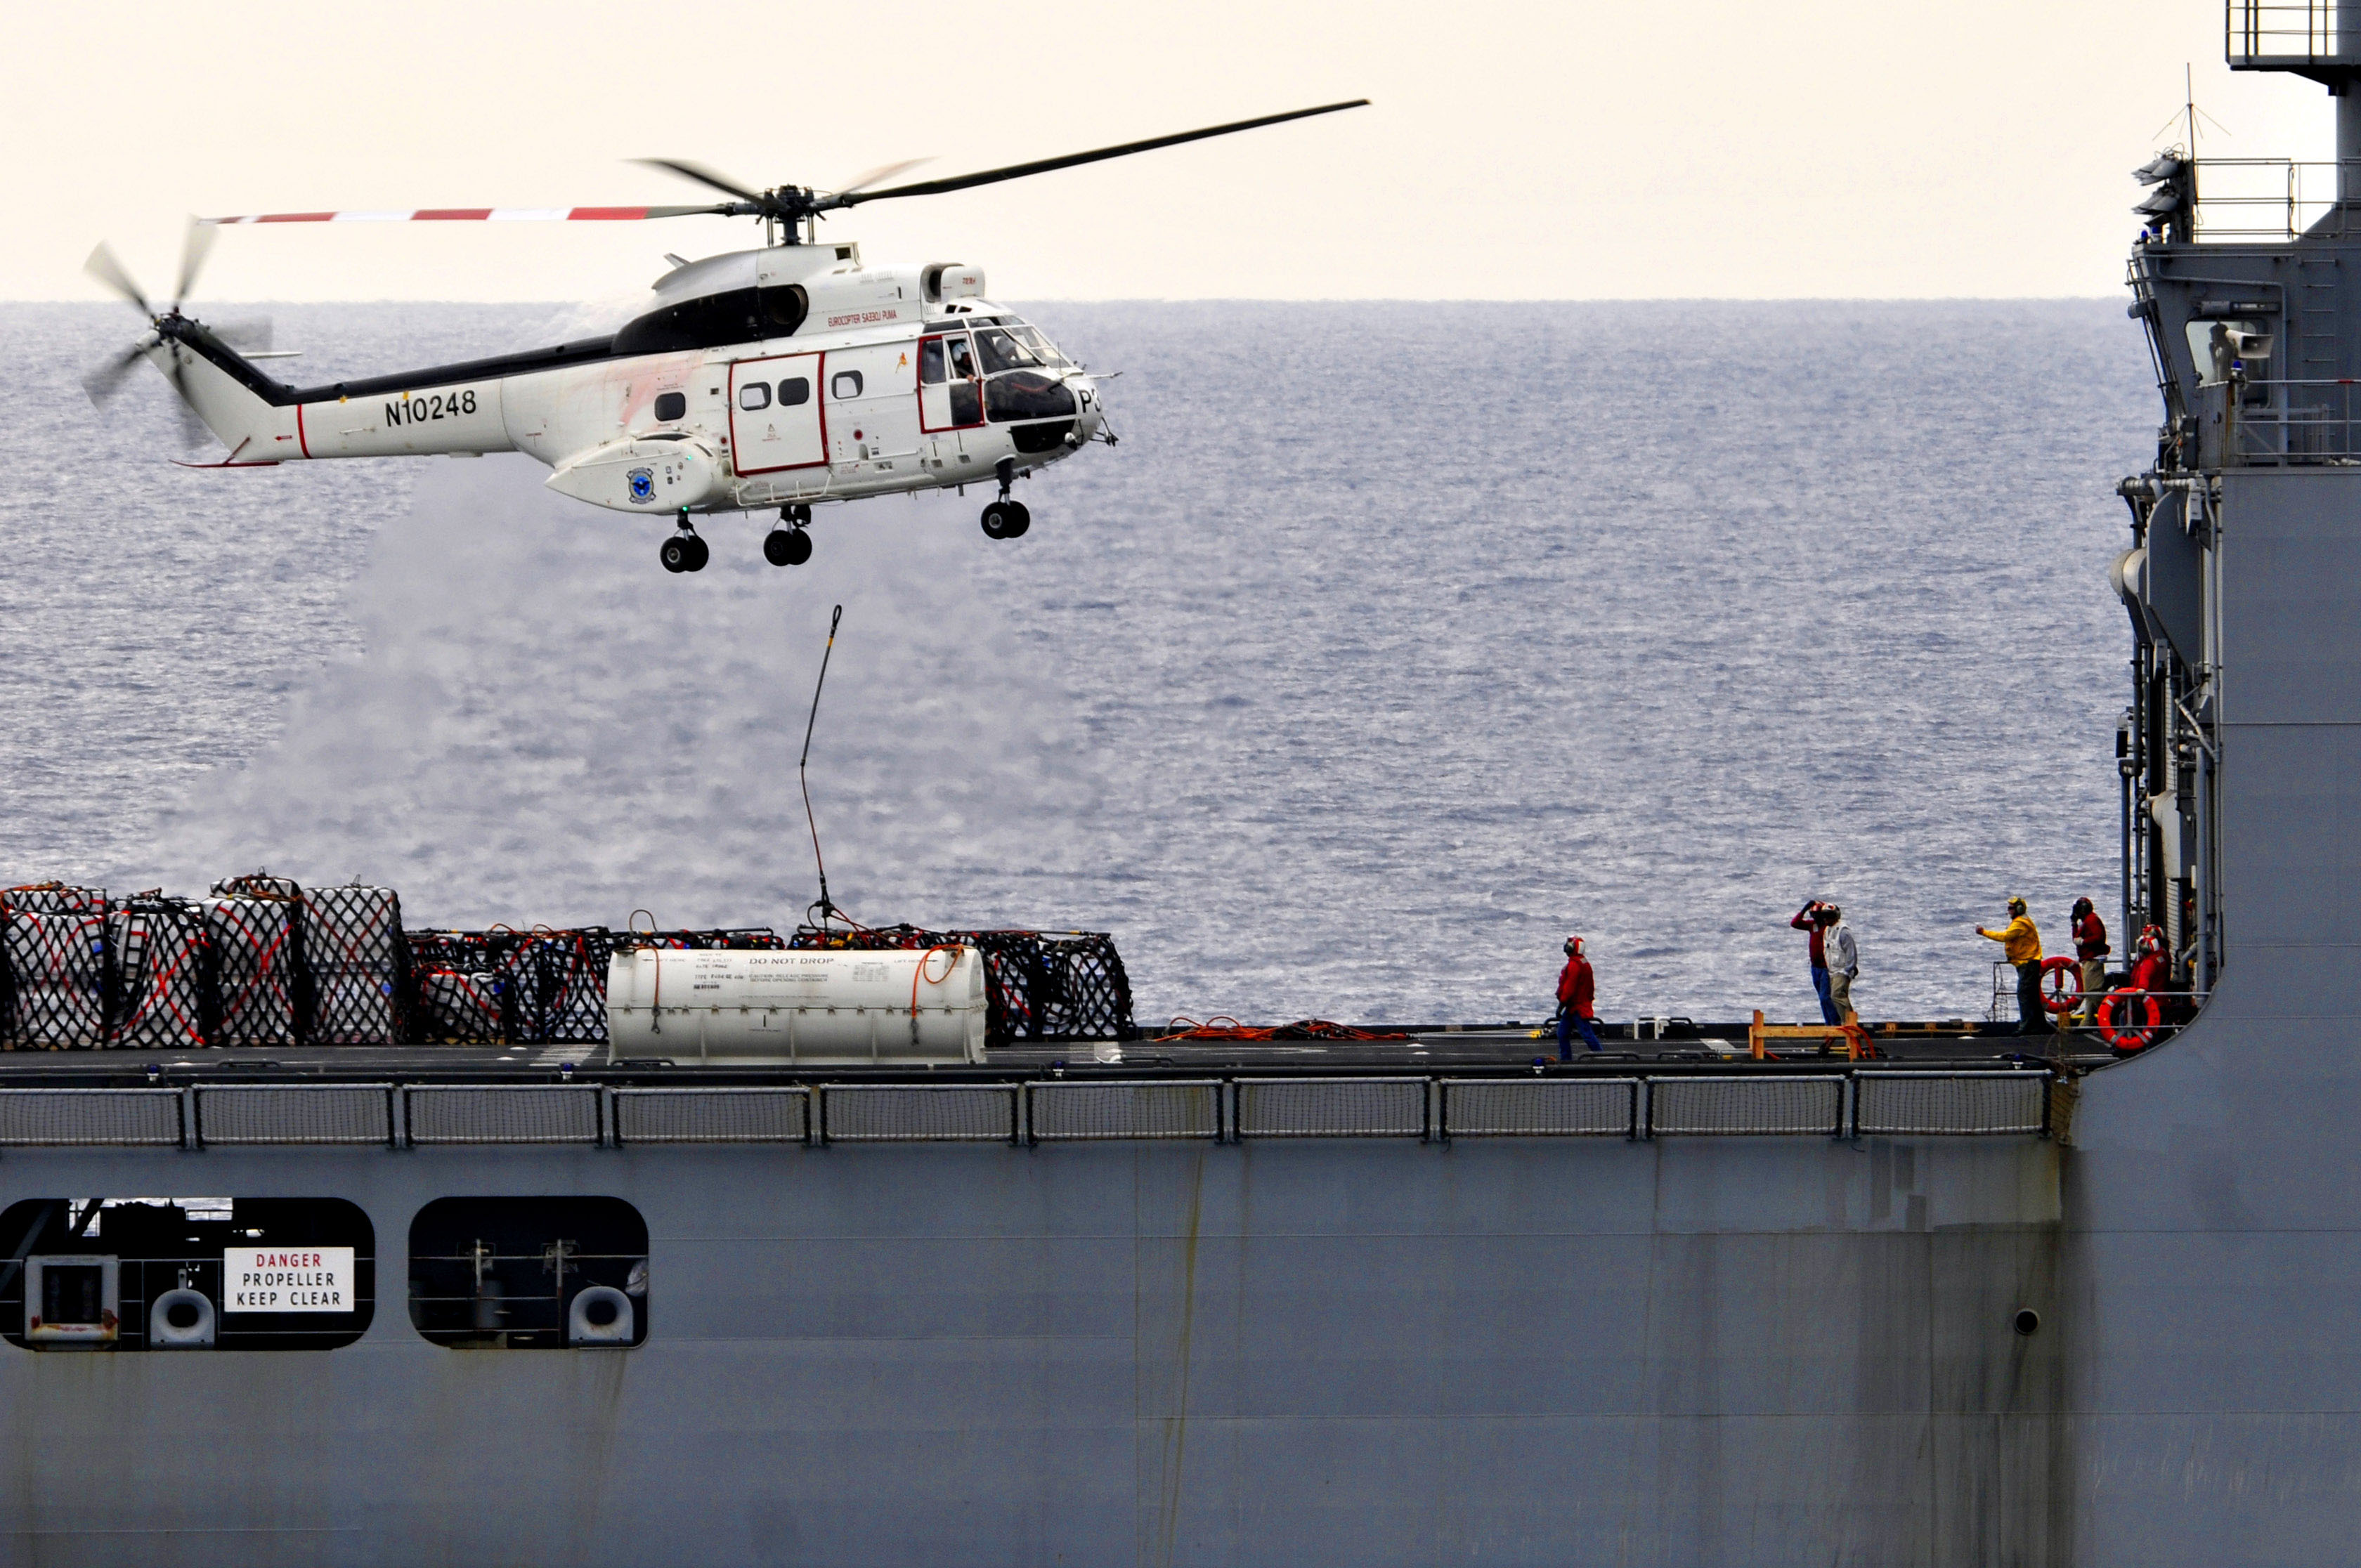 US Navy 110415-N-DM338-044 An SA-330 Puma helicopter assigned to the Military Sealift Command dry cargo and ammunition ship USNS Richard E. Byrd (T